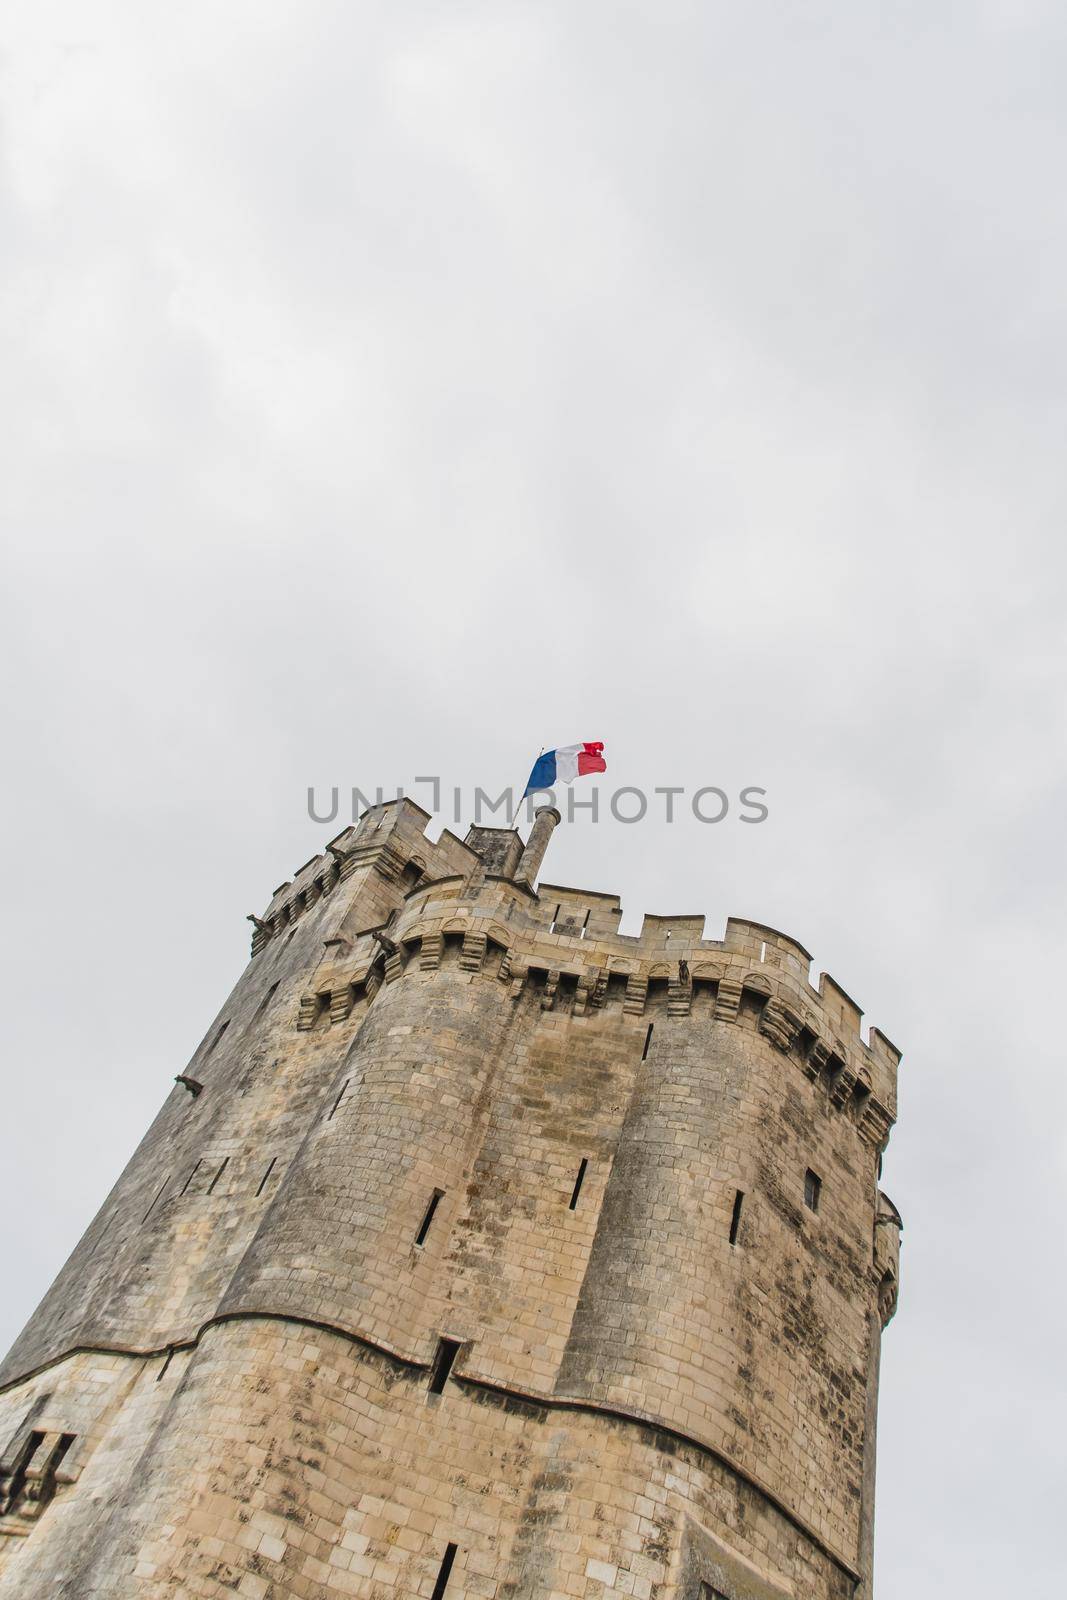 The Saint-Nicolas tower in La Rochelle by raphtong